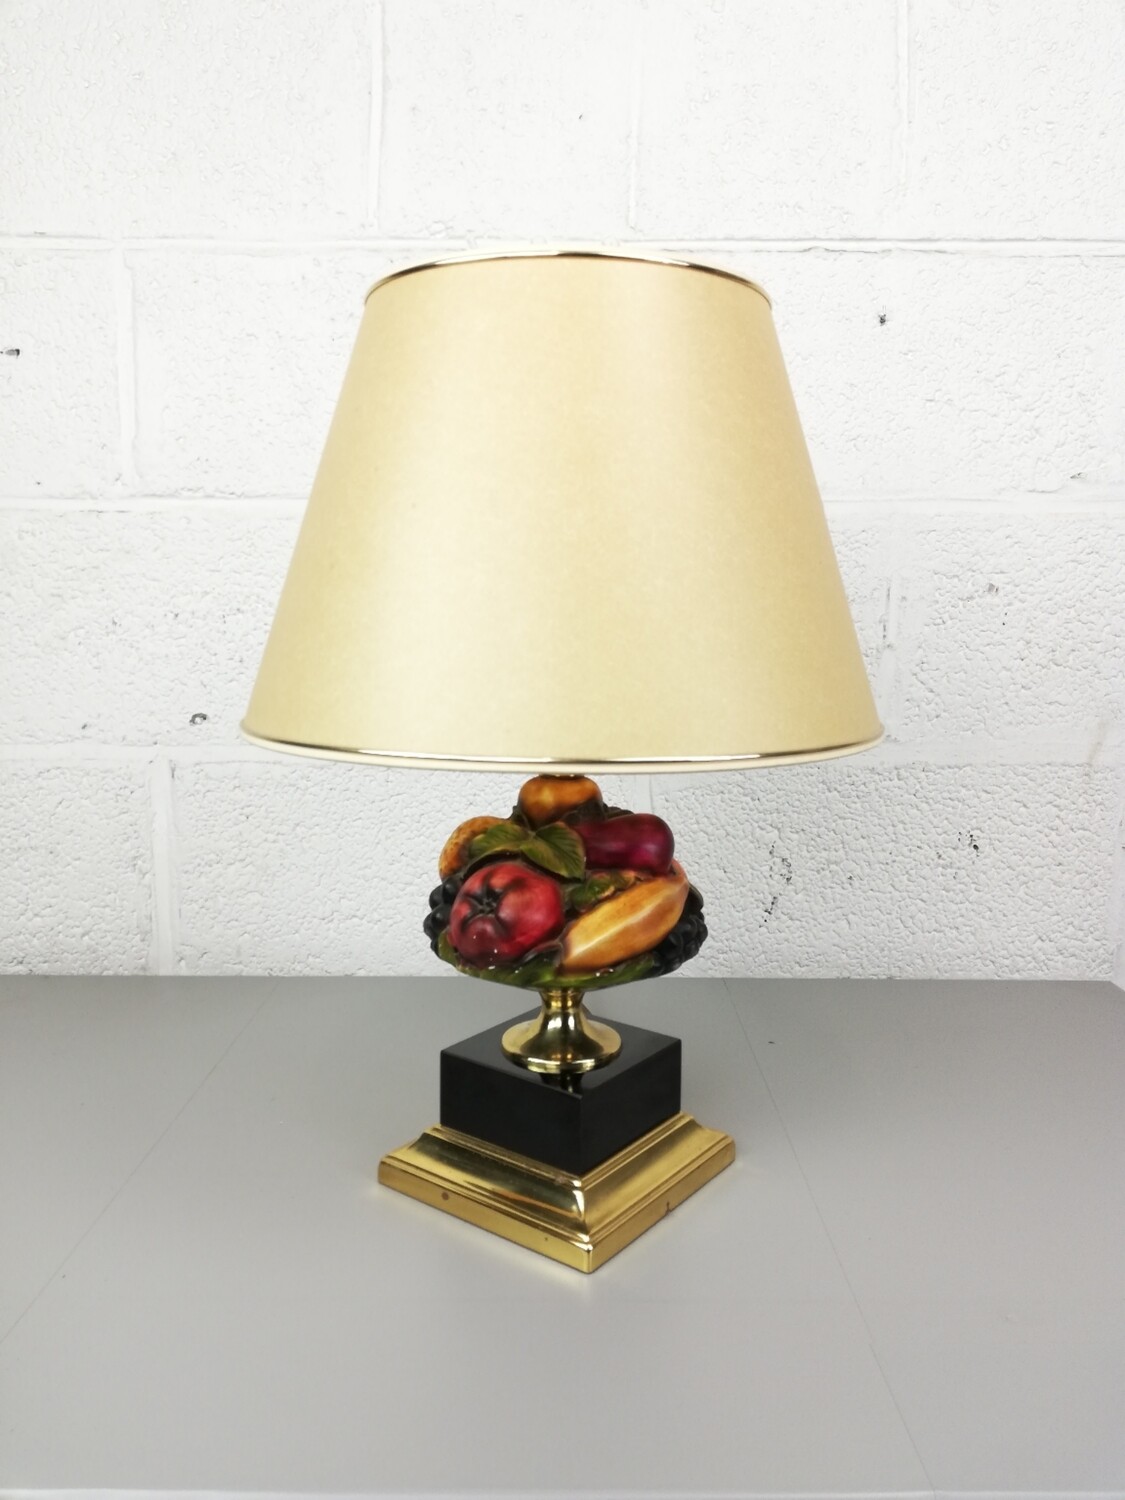 Vintage fruitlamp by Le Dauphin